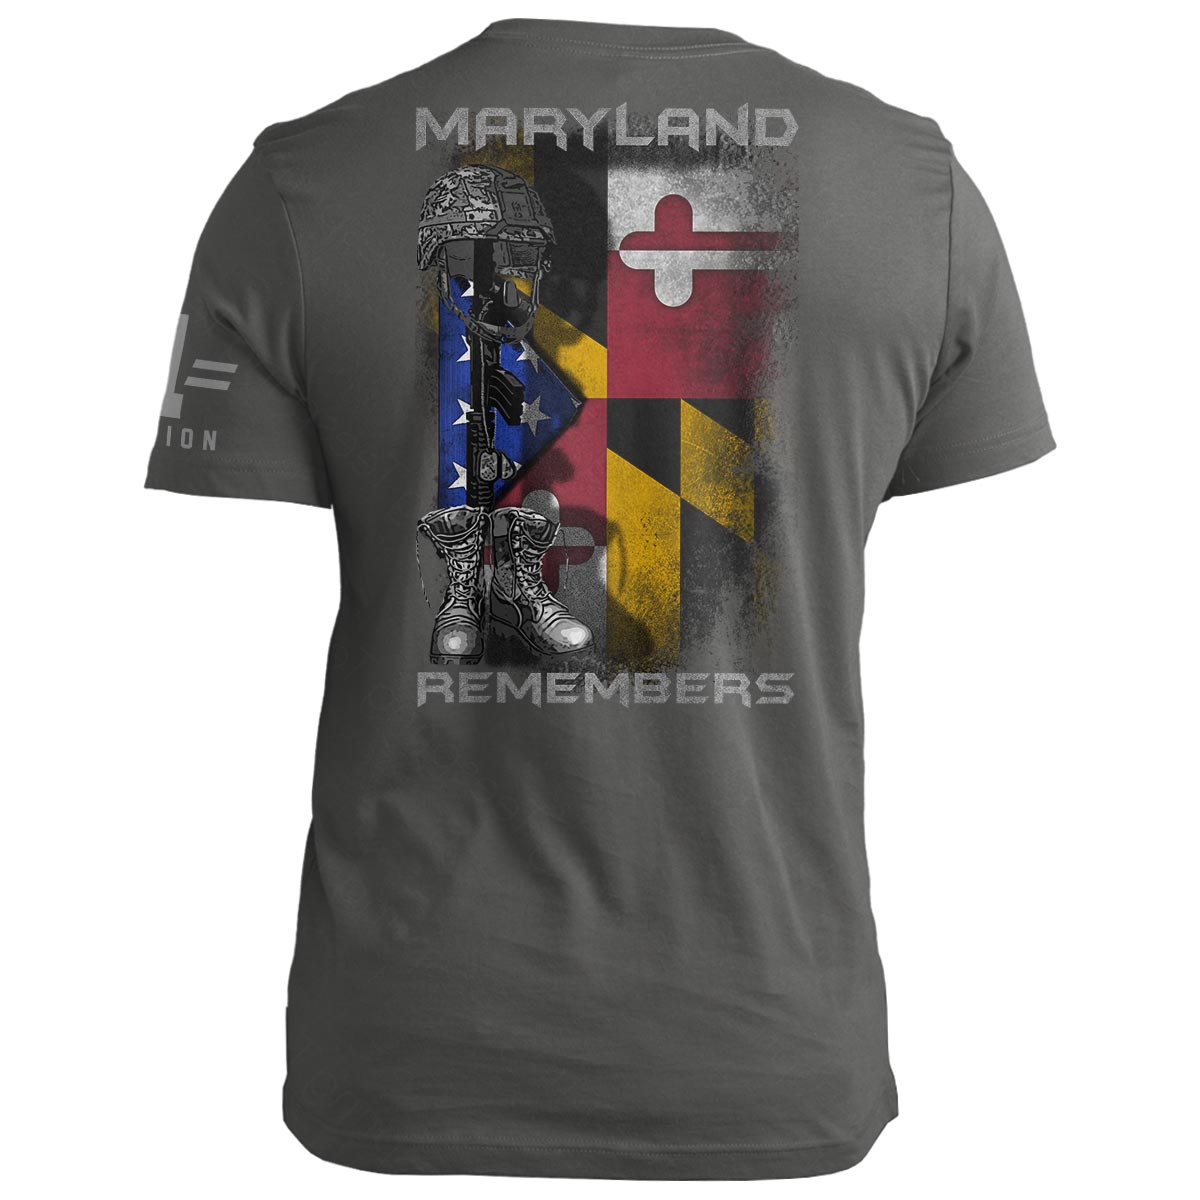 Maryland Remembers